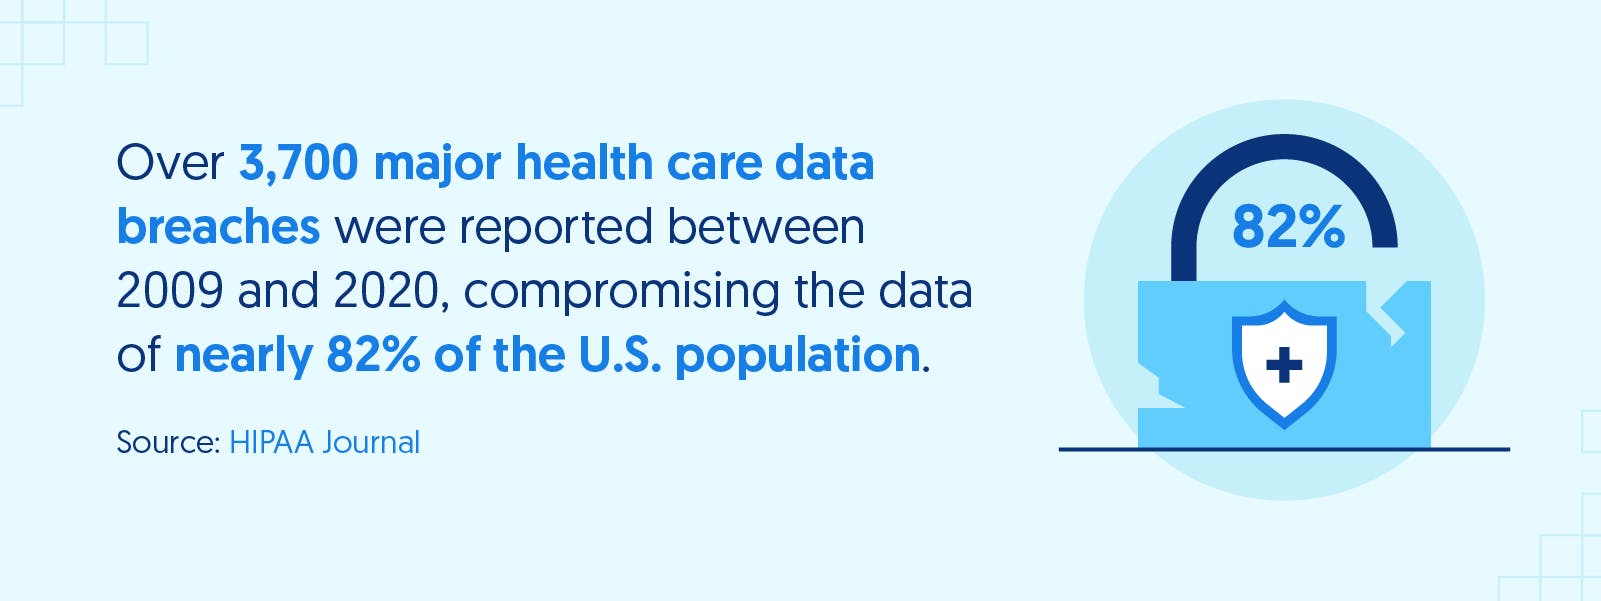 Statistic covering how 3,700 major health care data breaches were reported between 2009 and 2020 along with an illustration of a broken lock. 